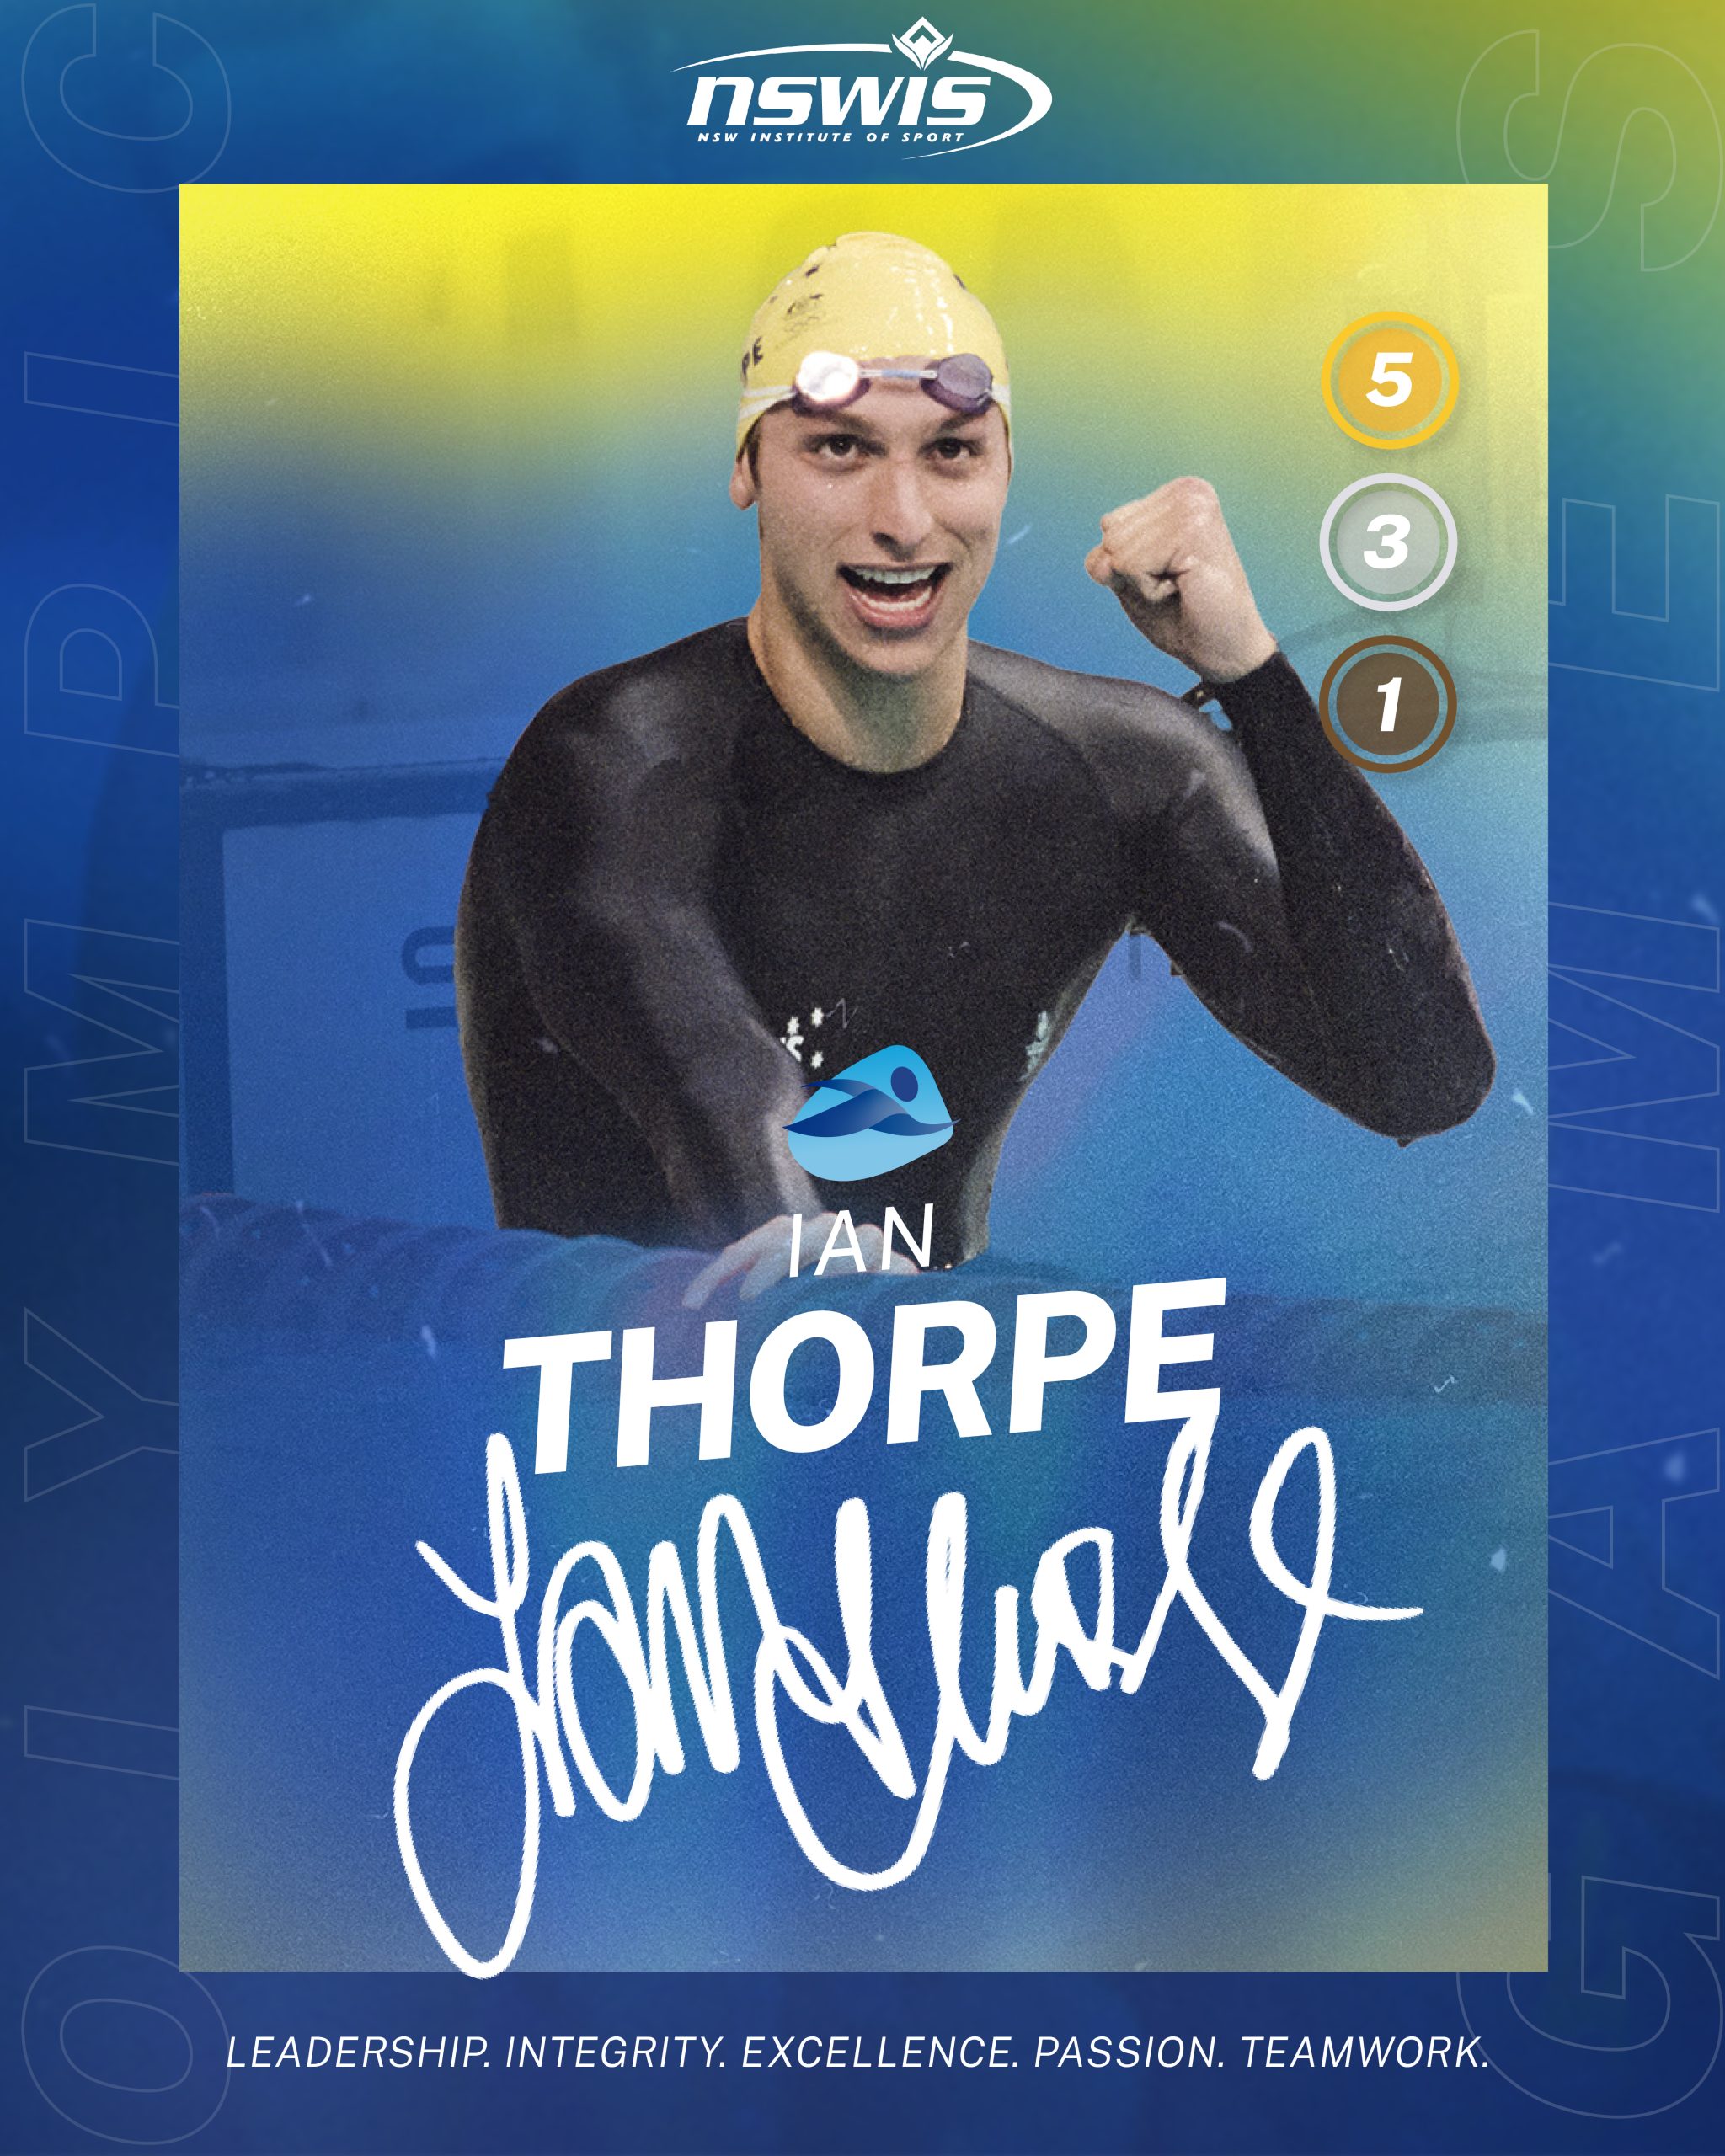 Ian Thorpe Most Outstanding Card